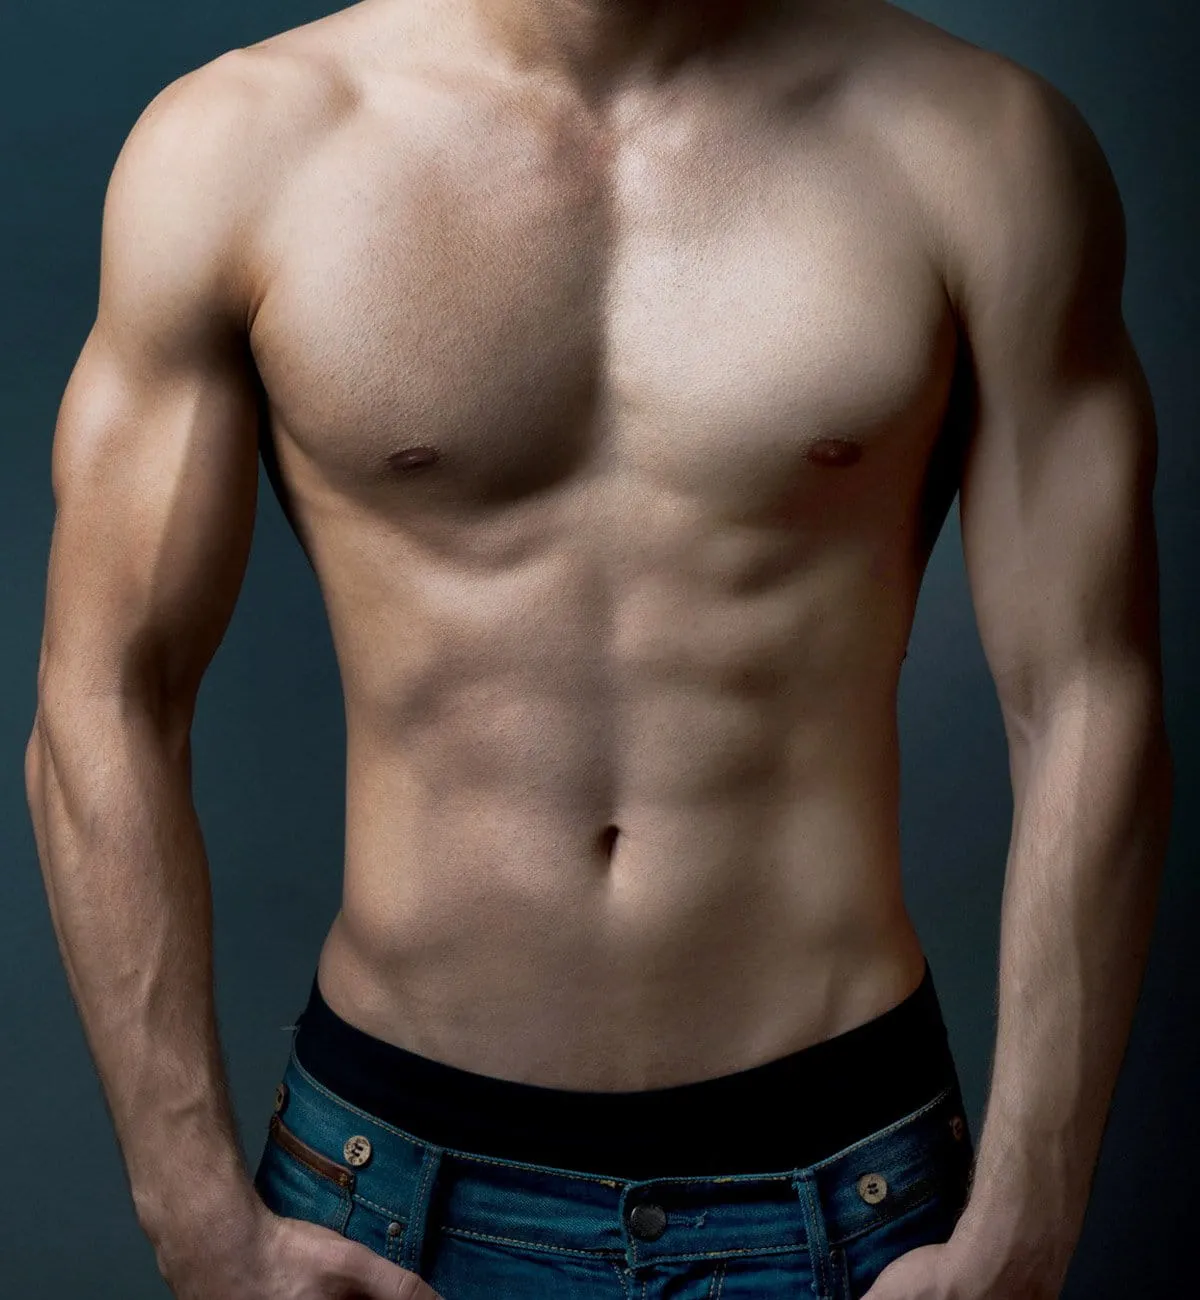 Topless man with chiseled abs wearing jeans